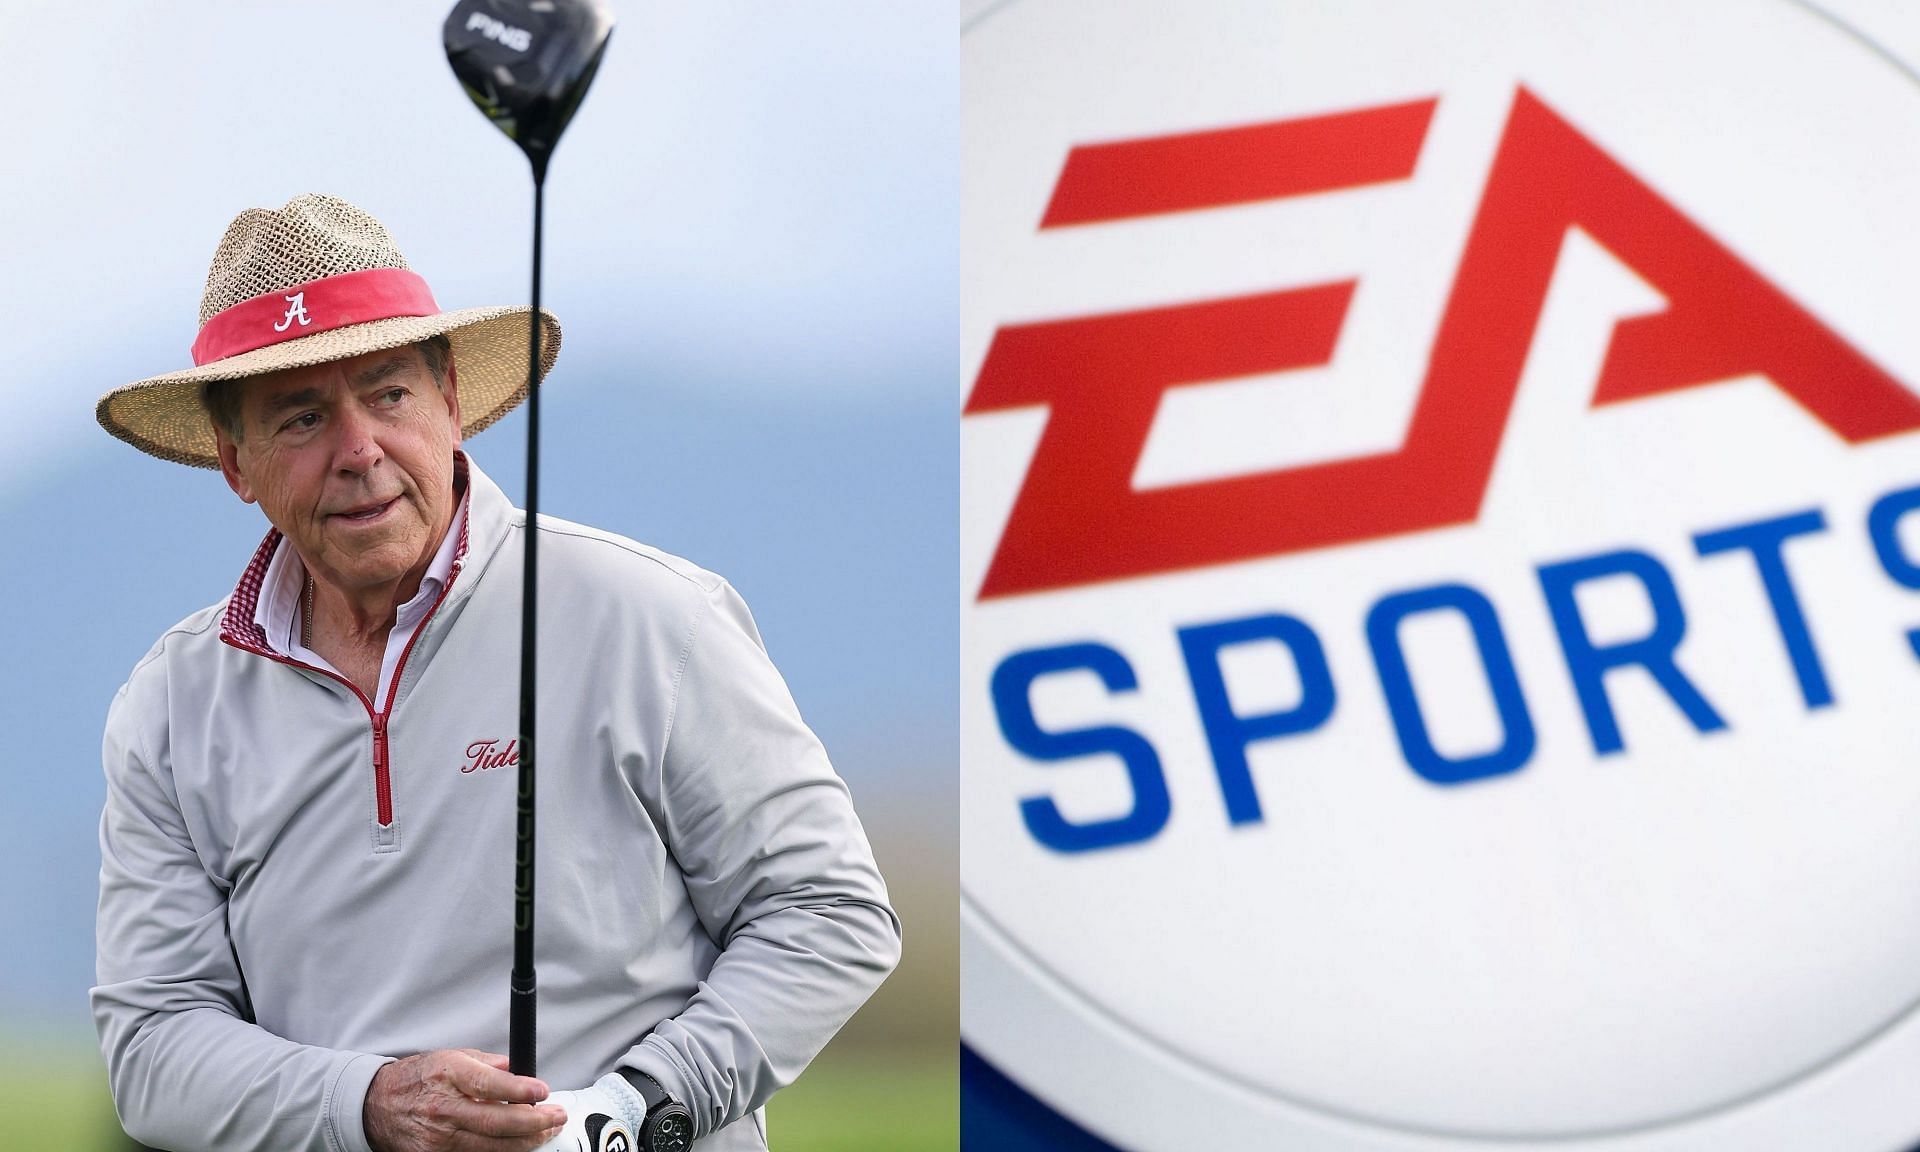 Will Nick Saban, a coaching legend, become the face of the EA Sports